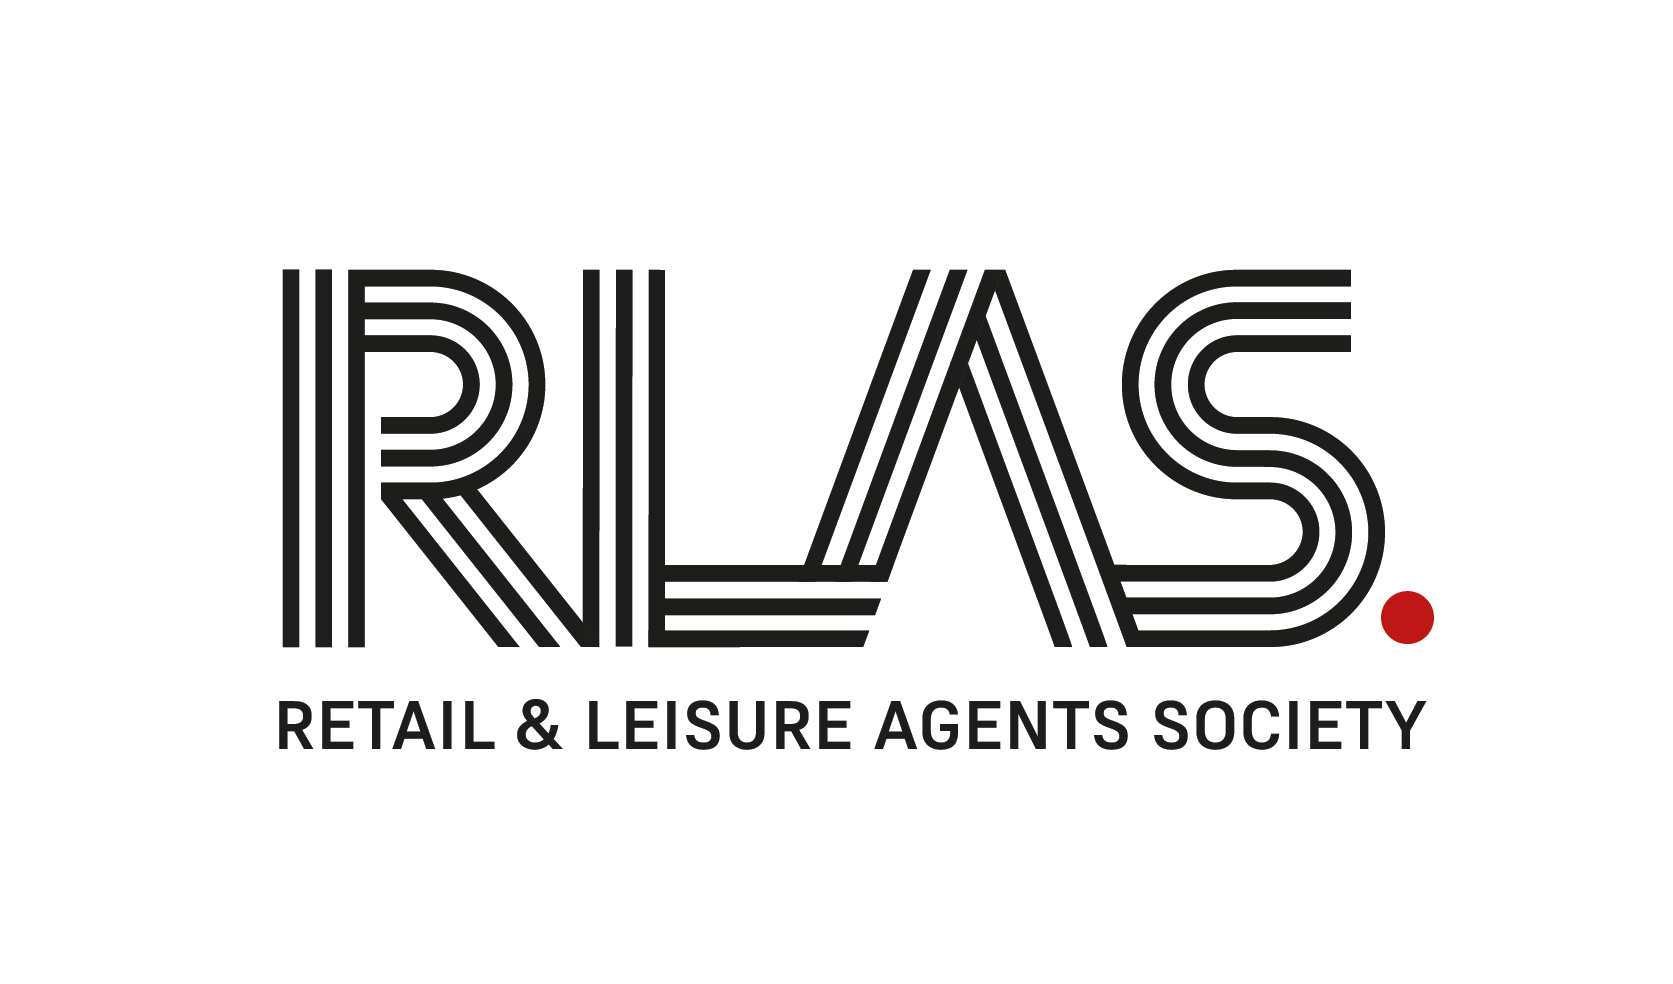 Retail & Leisure Agents Society